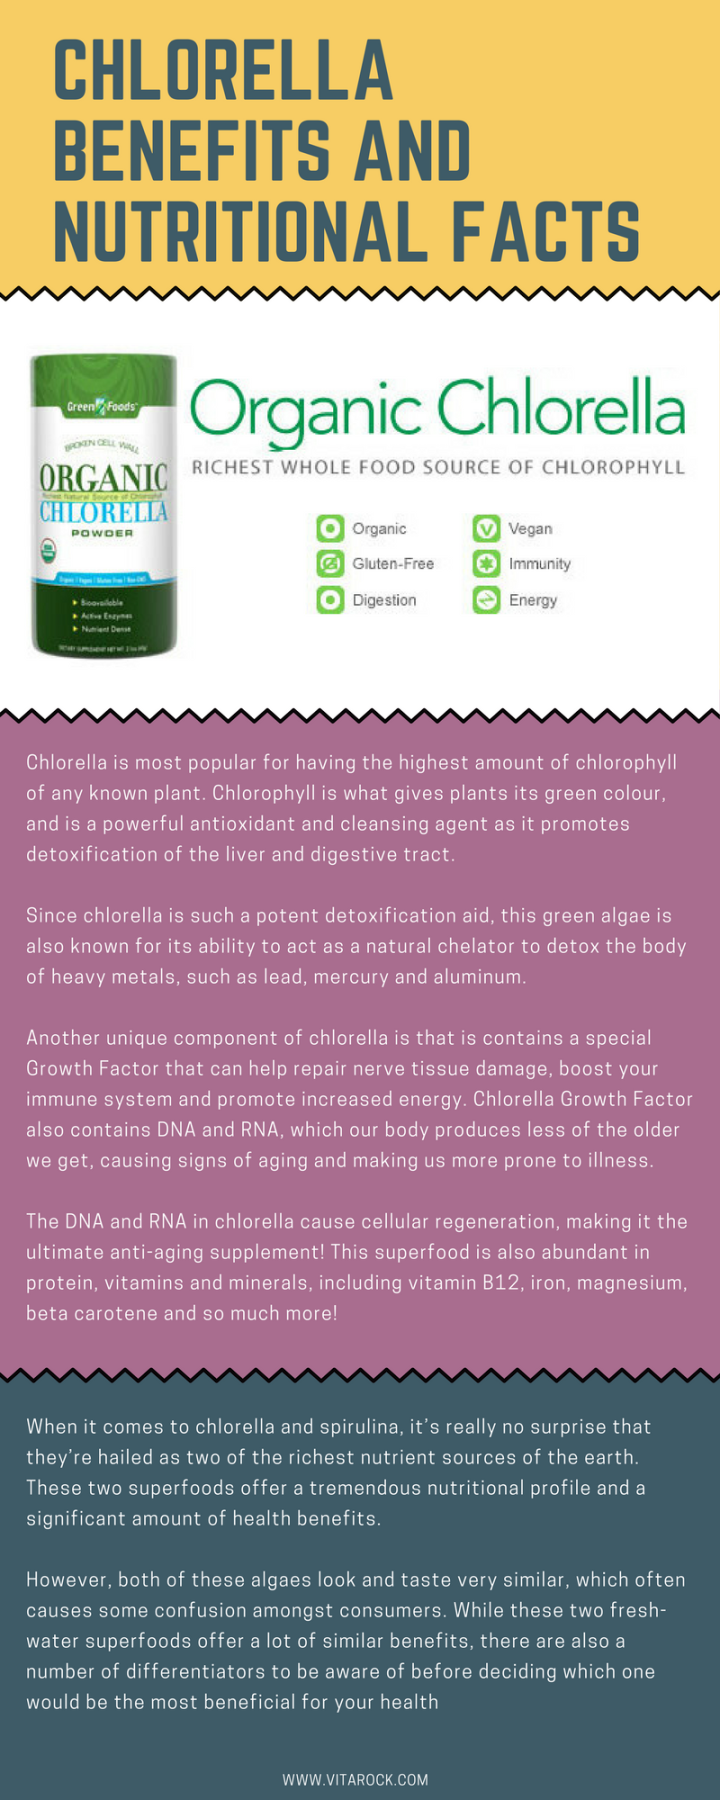 Chlorella Benefits and Nutrition Facts